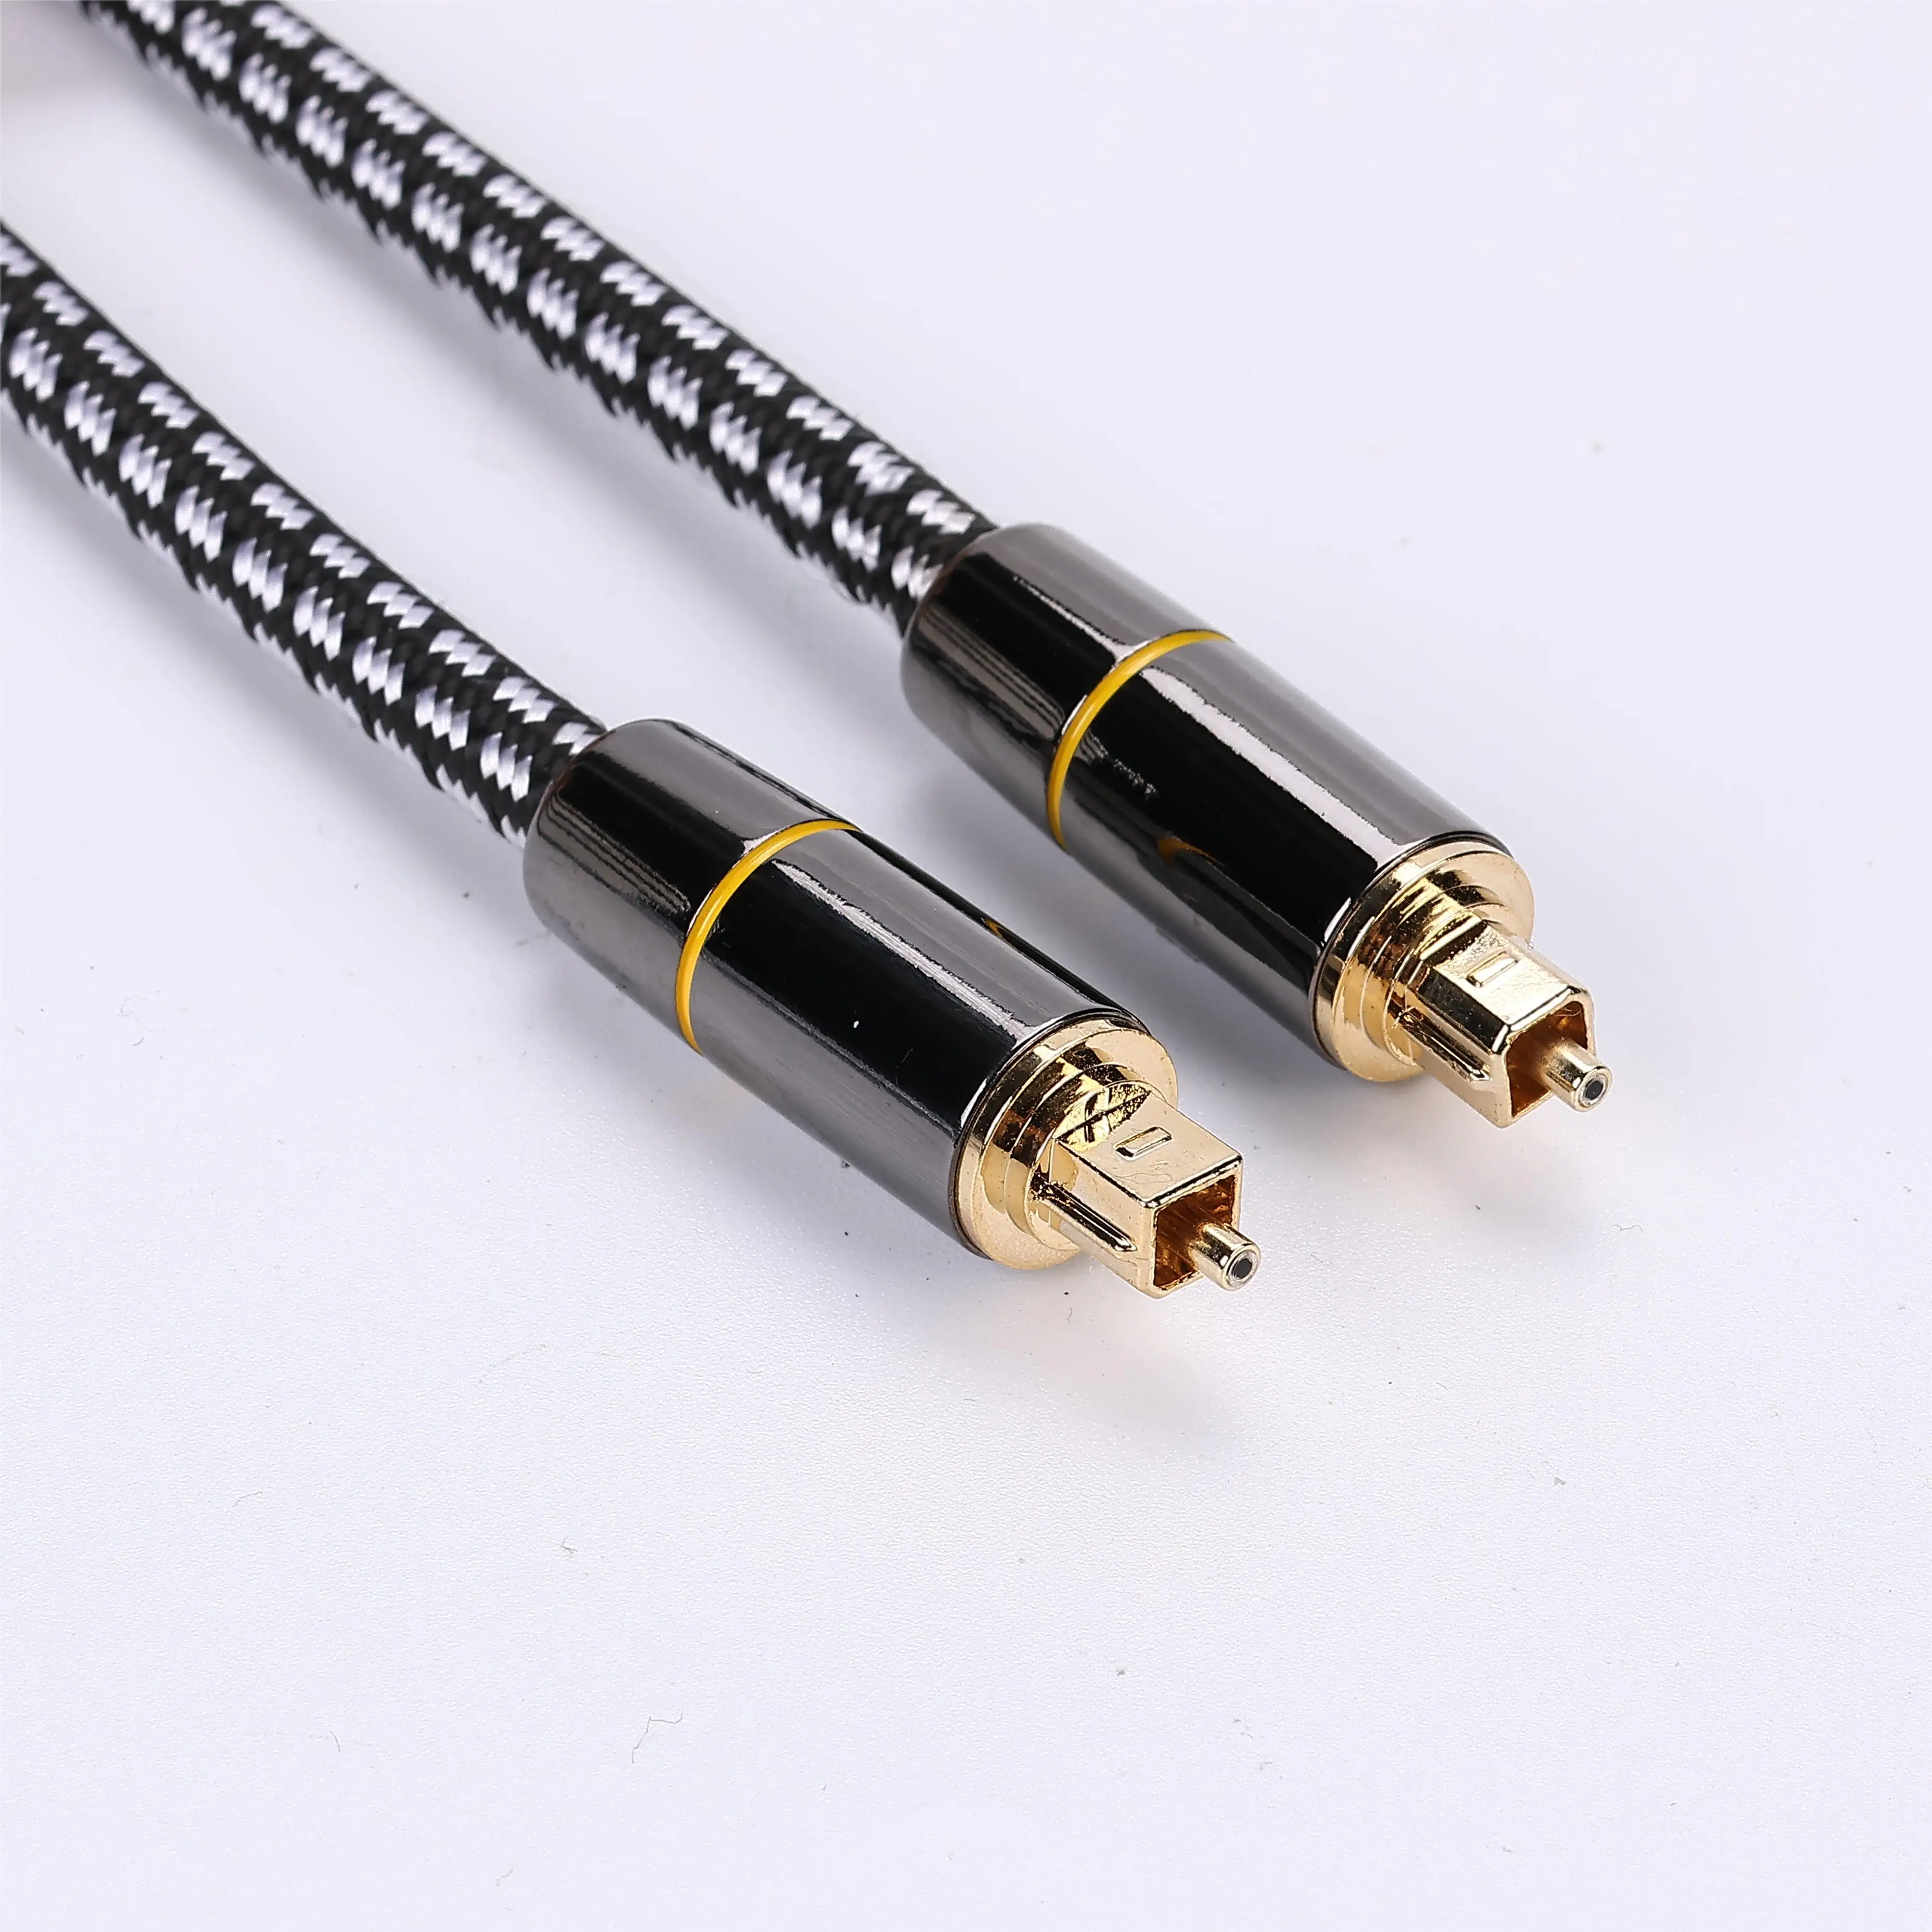 Classic Digital Optical Audio Cable Toslink Optical Cable Fiber Optic Cable for TV PS4 Xbox VD/CD Player